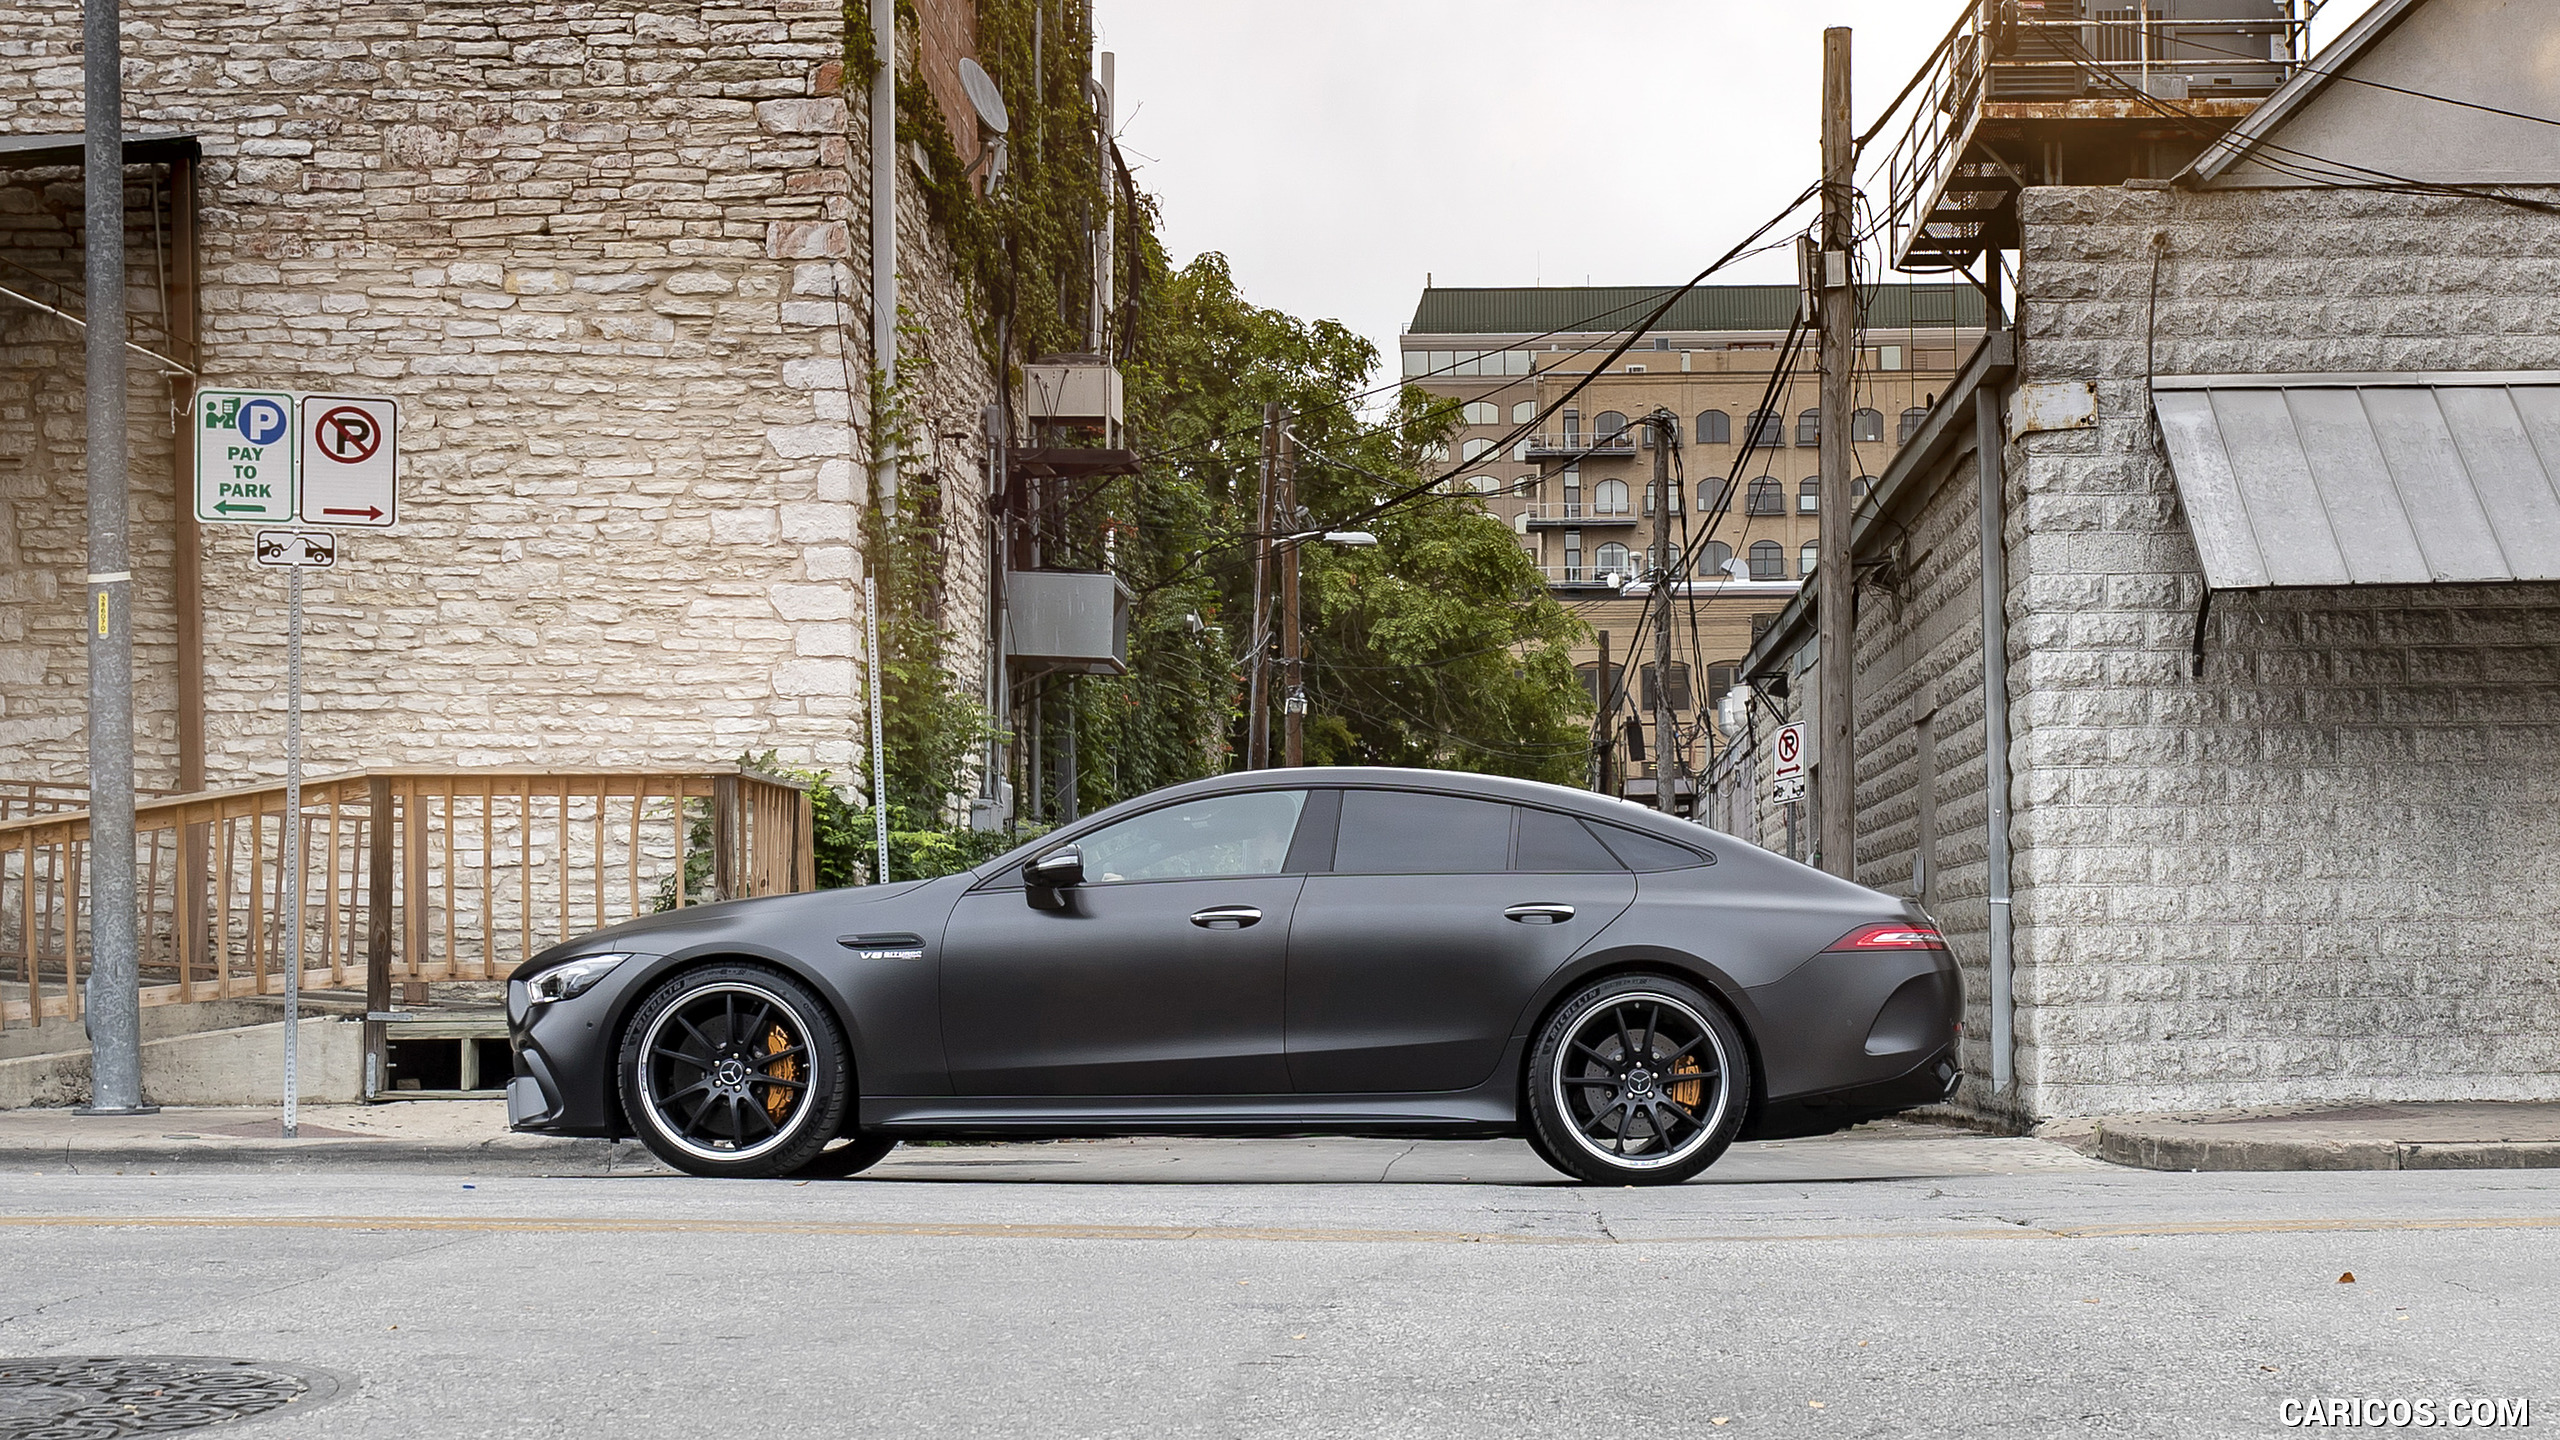 2019 Mercedes-AMG GT 63 S 4MATIC+ 4-Door Coupe - Side, #197 of 427